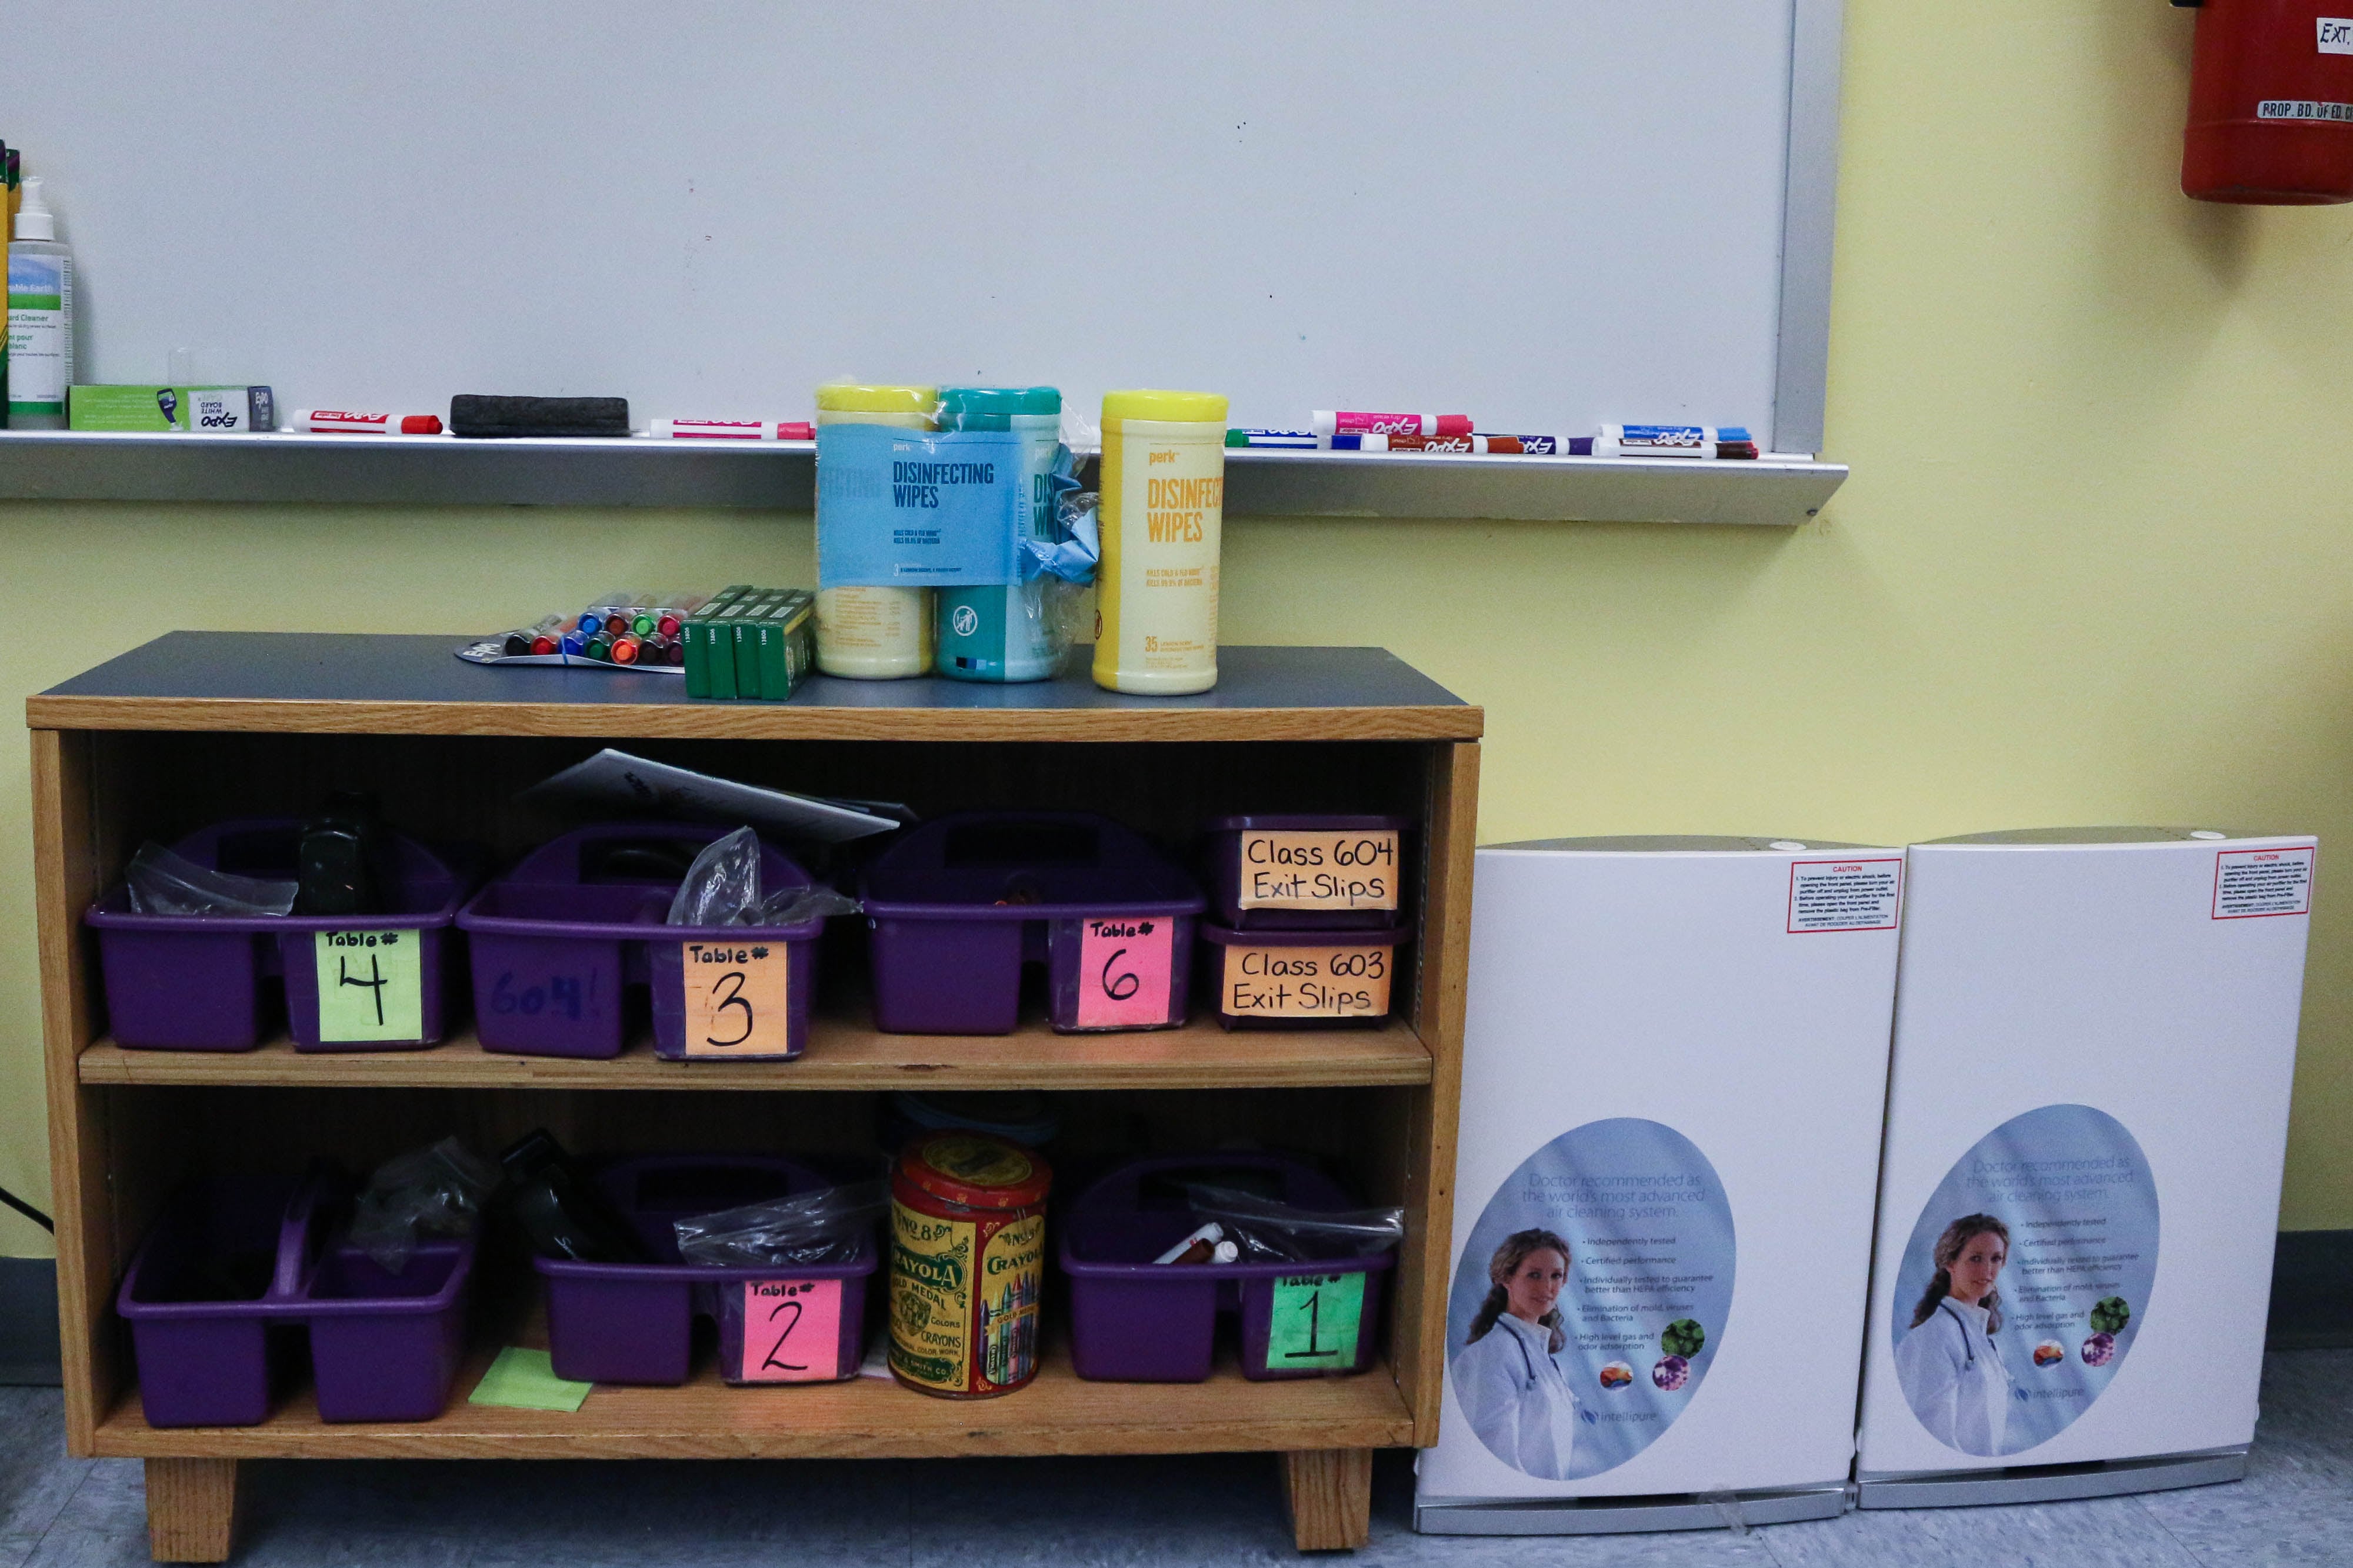 Two Intellipure air purifiers sit next to a storage shelf and a whiteboard in a New York City classroom.